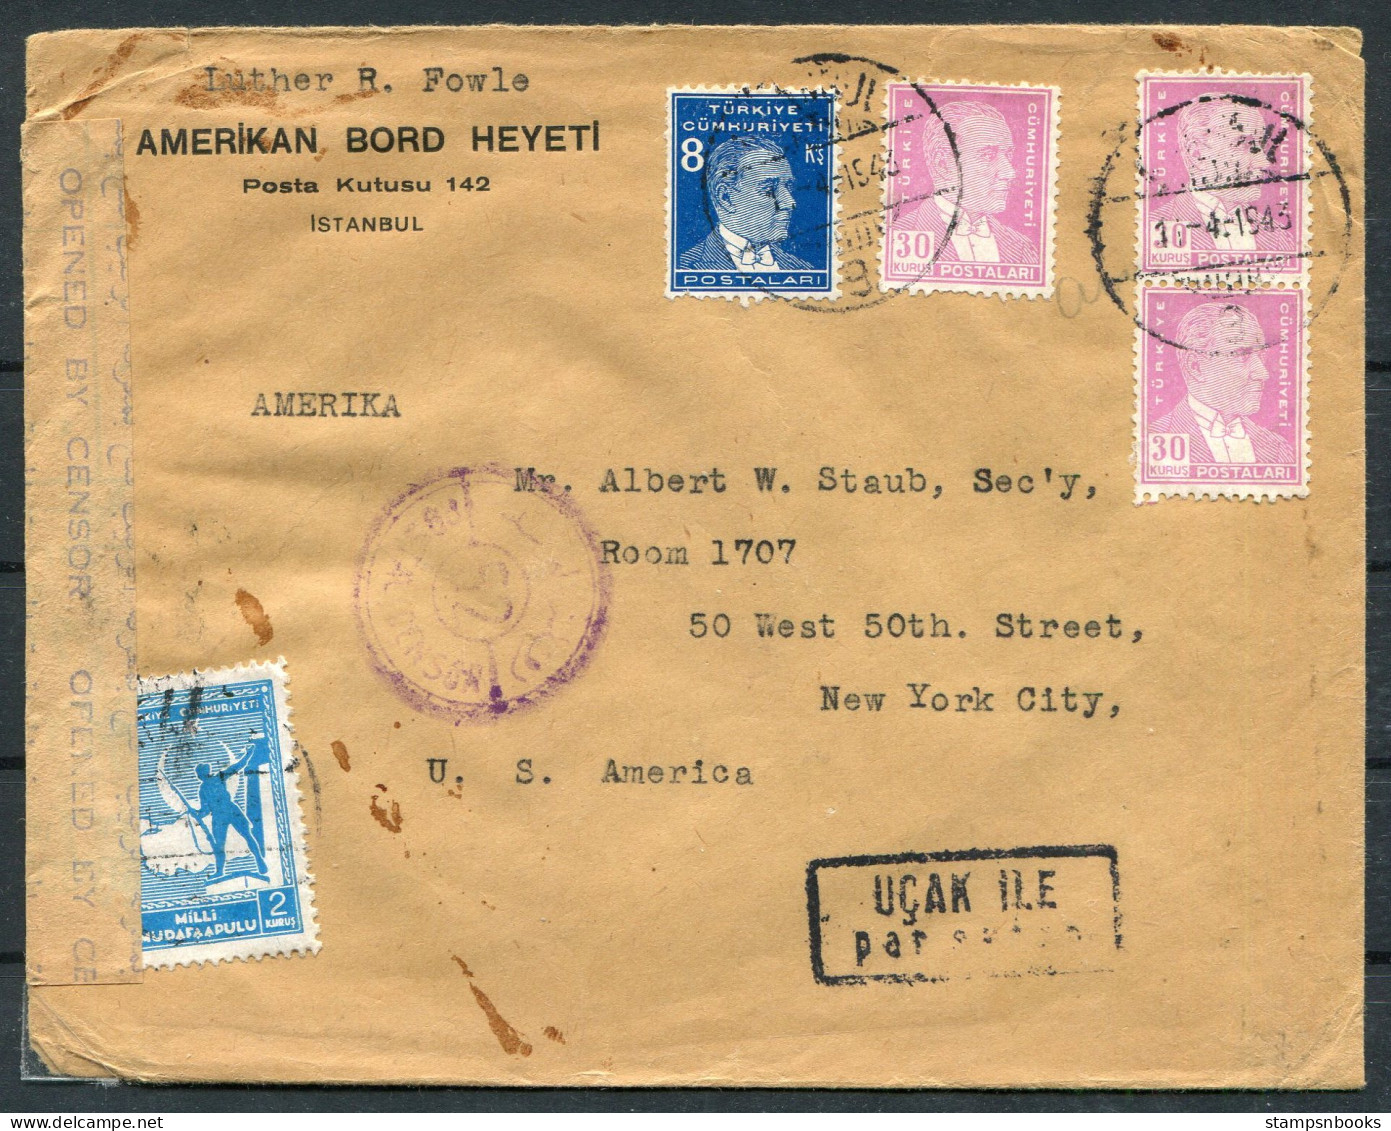 1943 Turkey Airmail Cover, Luther R Fowle, Amerikan Bord Heyeti Istanbul Mission Censor Cover - New York, USA - Briefe U. Dokumente